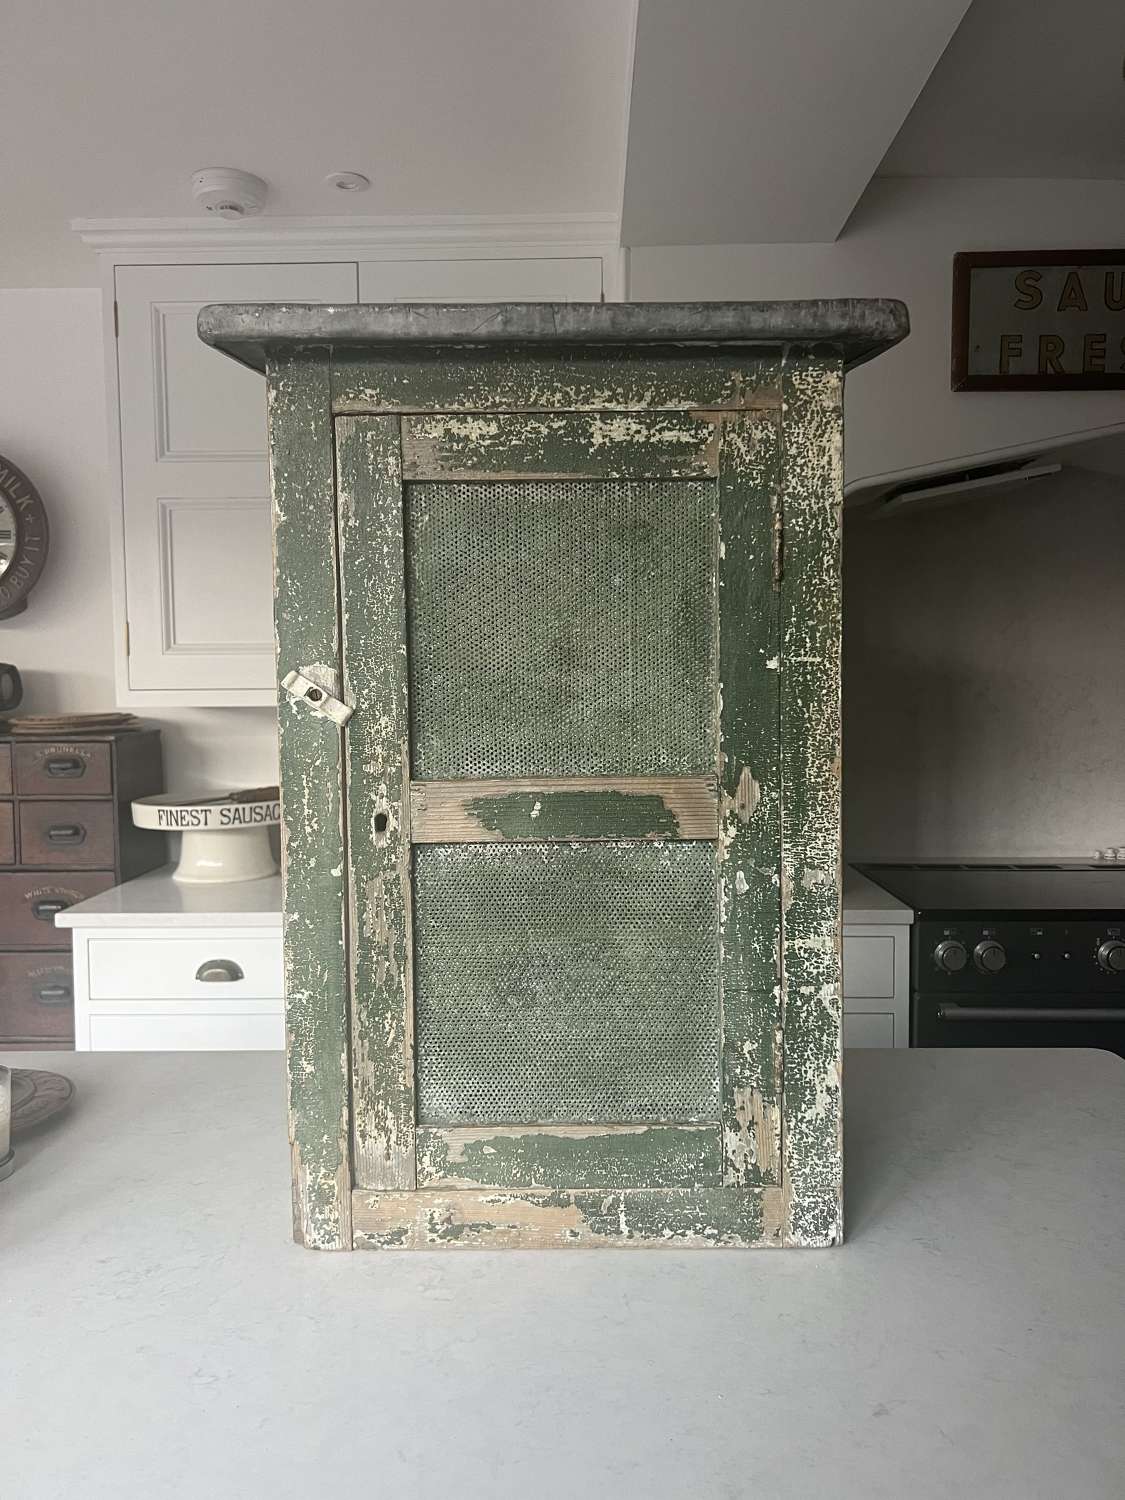 Late Victorian Food Safe with Lead Top in its Original Paint.